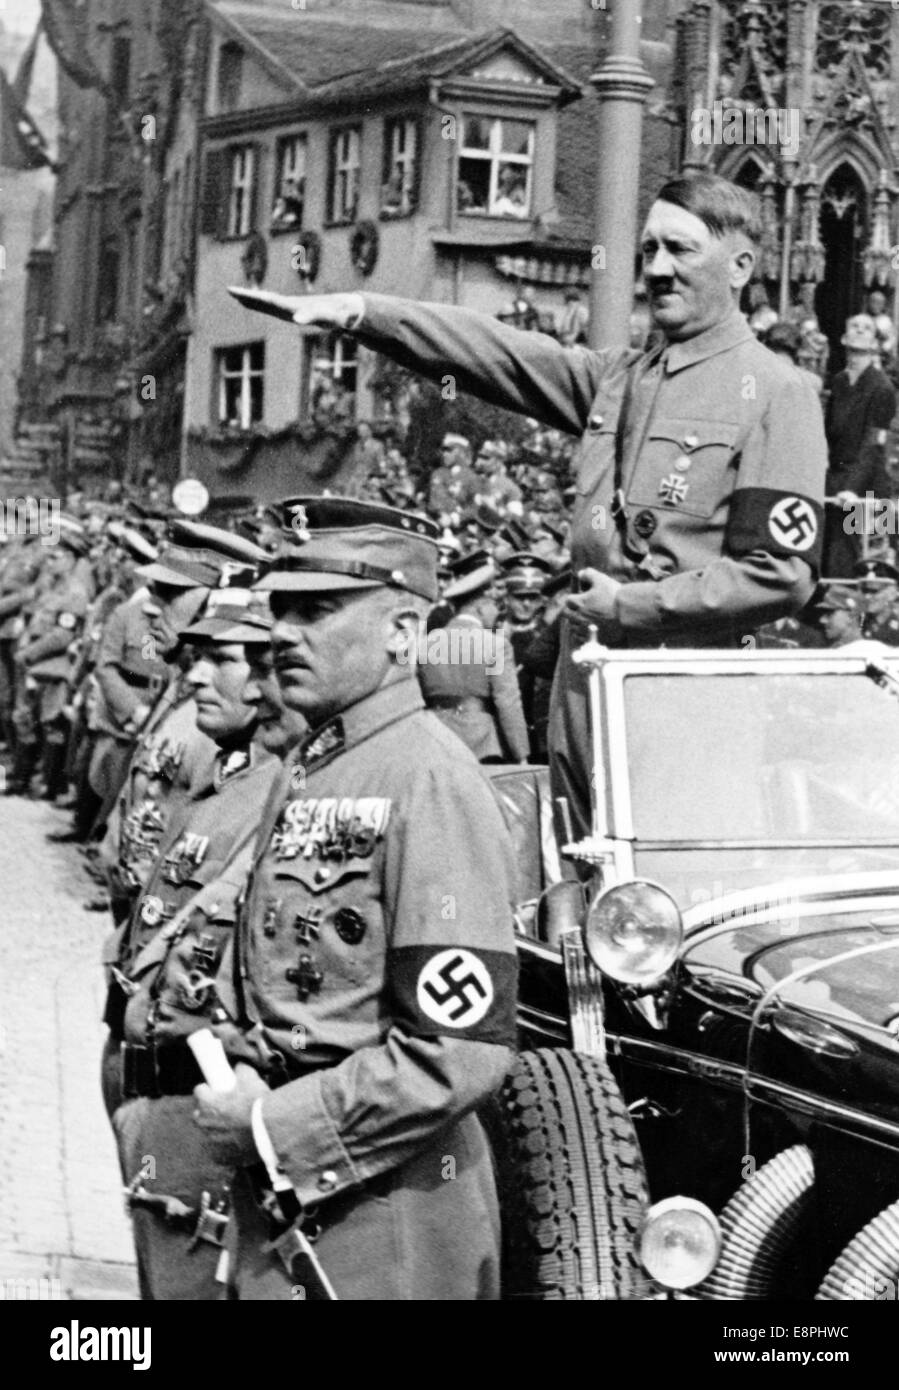 Nuremberg Rally 1937 in Nuremberg, Germany - Adolf Hitler salutes the march-past of the Sturmabteilung (SA) on Adolf-Hitler-Square. In front of Hitler: commander of the SA Viktor Lutze (L), Reich Minister Hermann (2-R) and SA functionary Franz von Pfeffer. (Flaws in quality due to the historic picture copy) Fotoarchiv für Zeitgeschichtee - NO WIRE SERVICE - Stock Photo